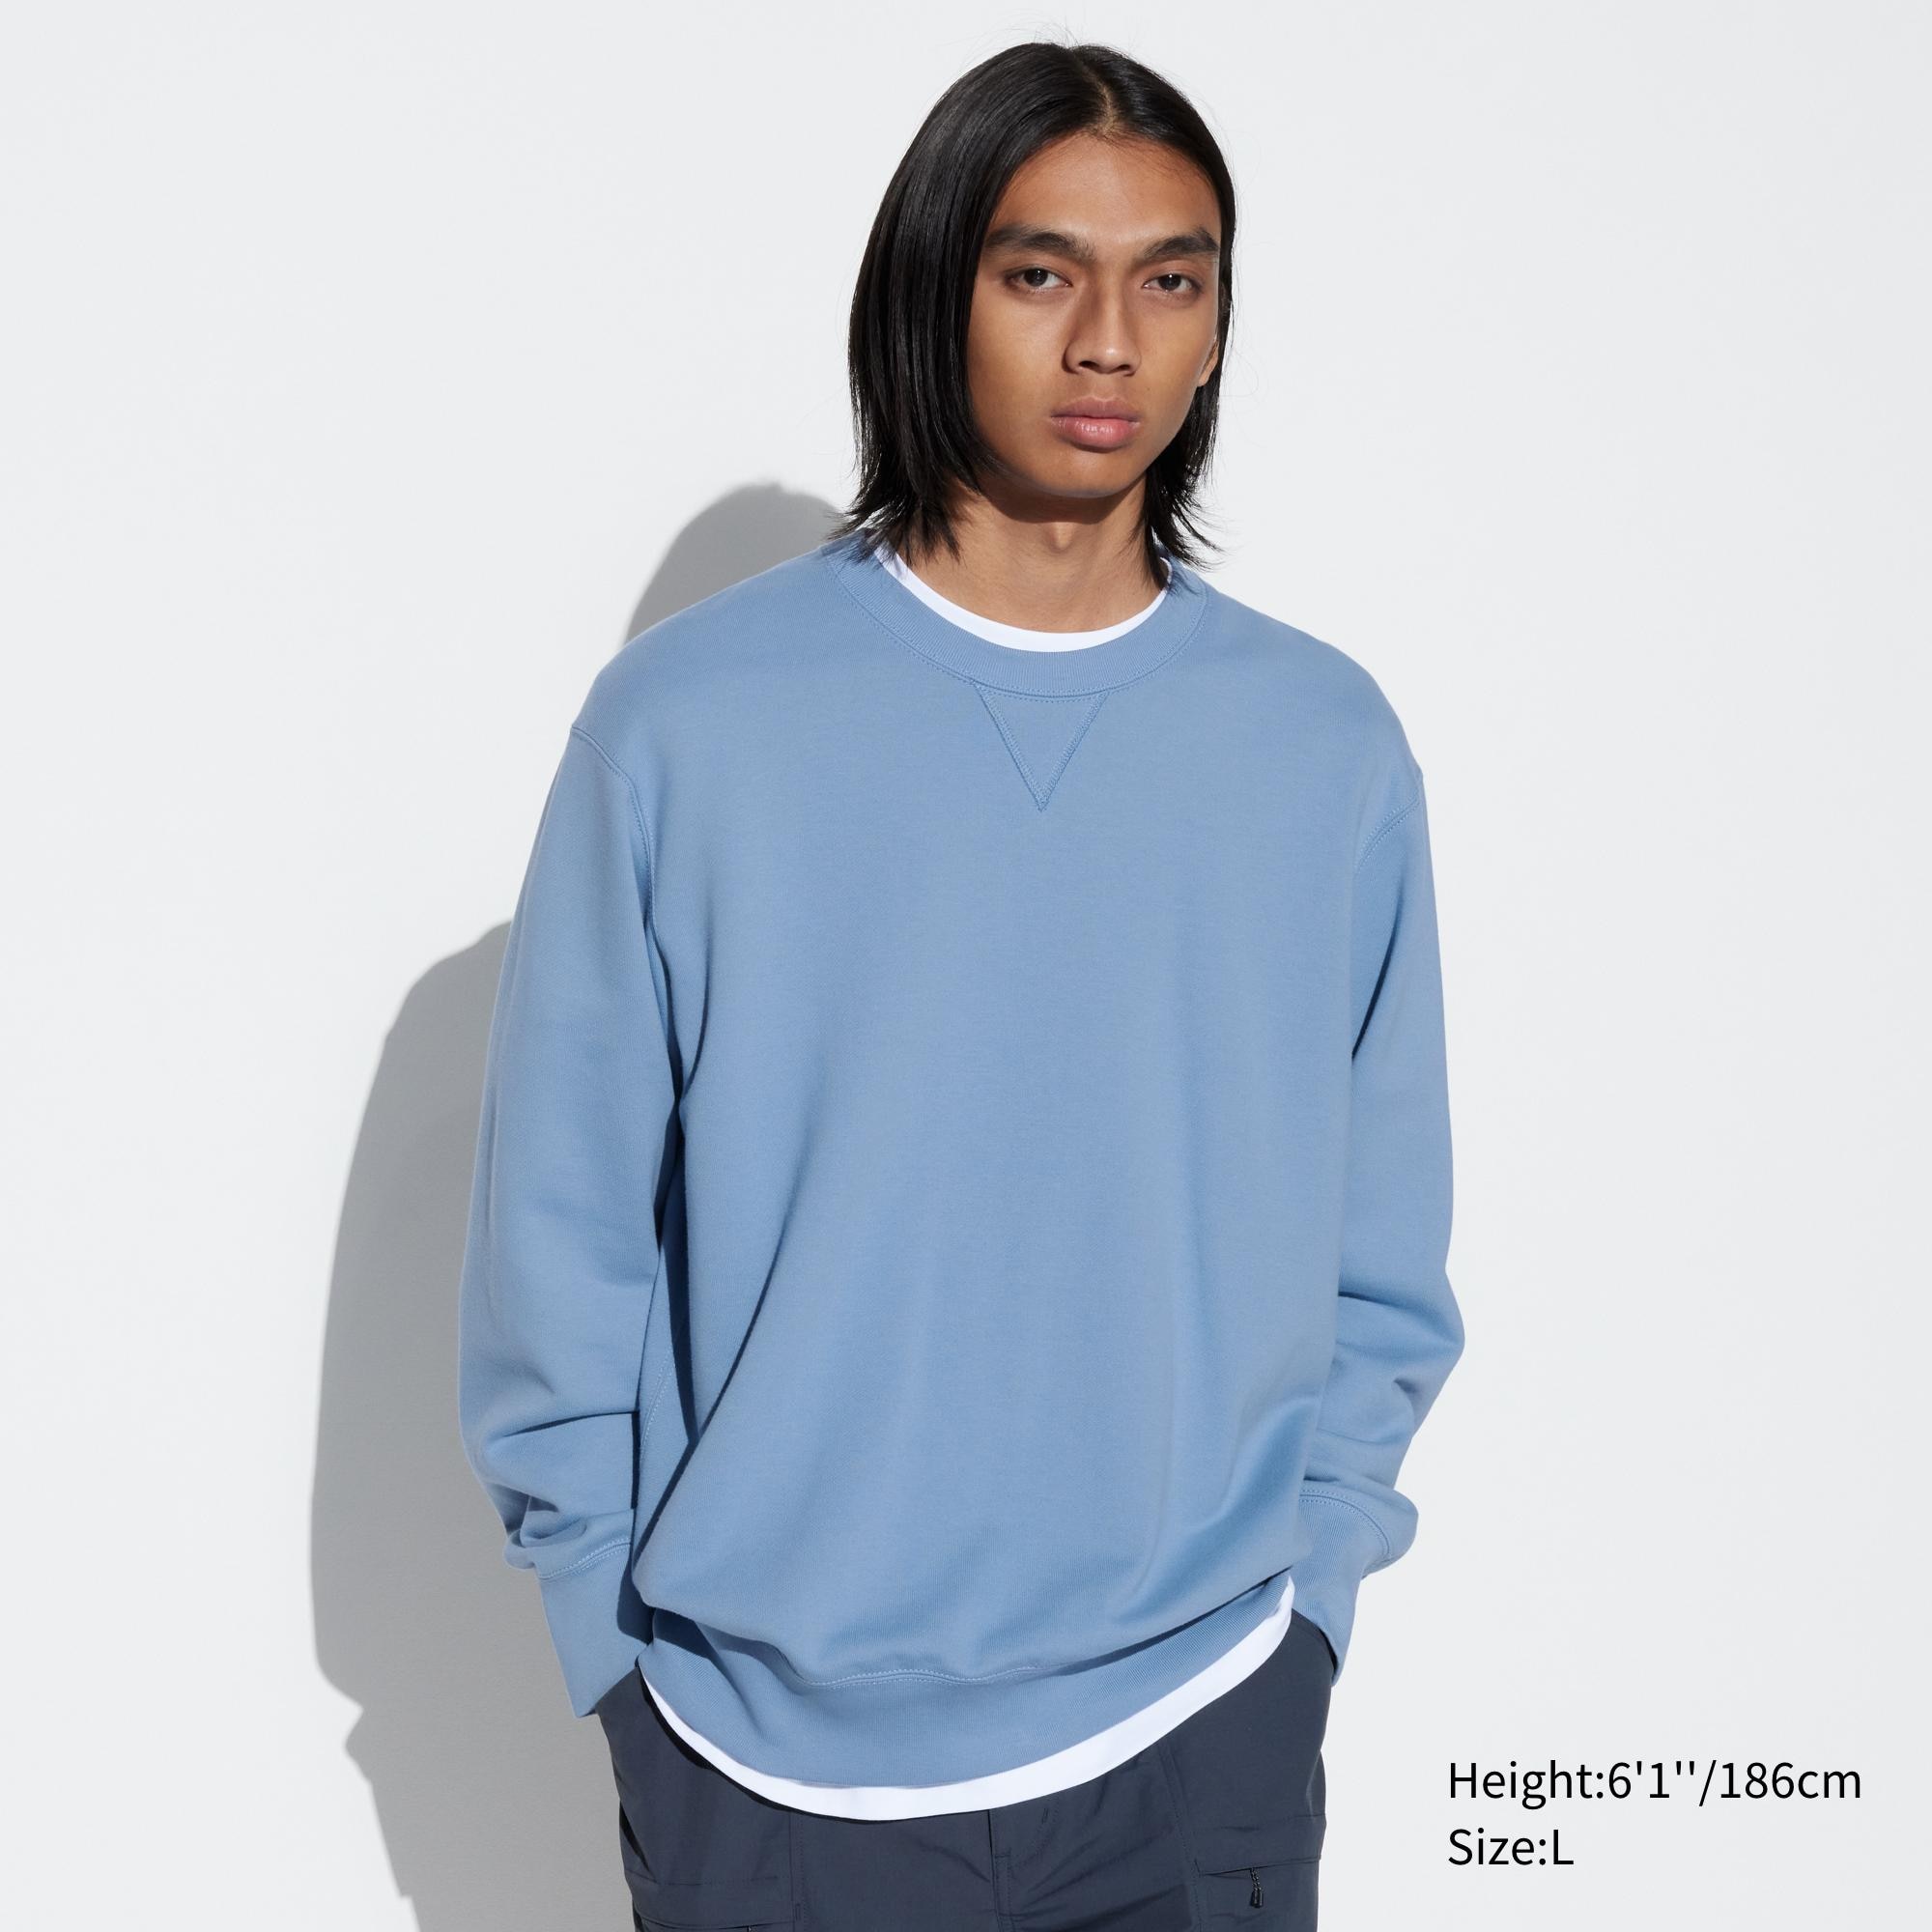 Check styling ideas for「Sweatshirt、Washed Cotton Striped Crew Neck  Long-Sleeve T-Shirt (Oversized)」